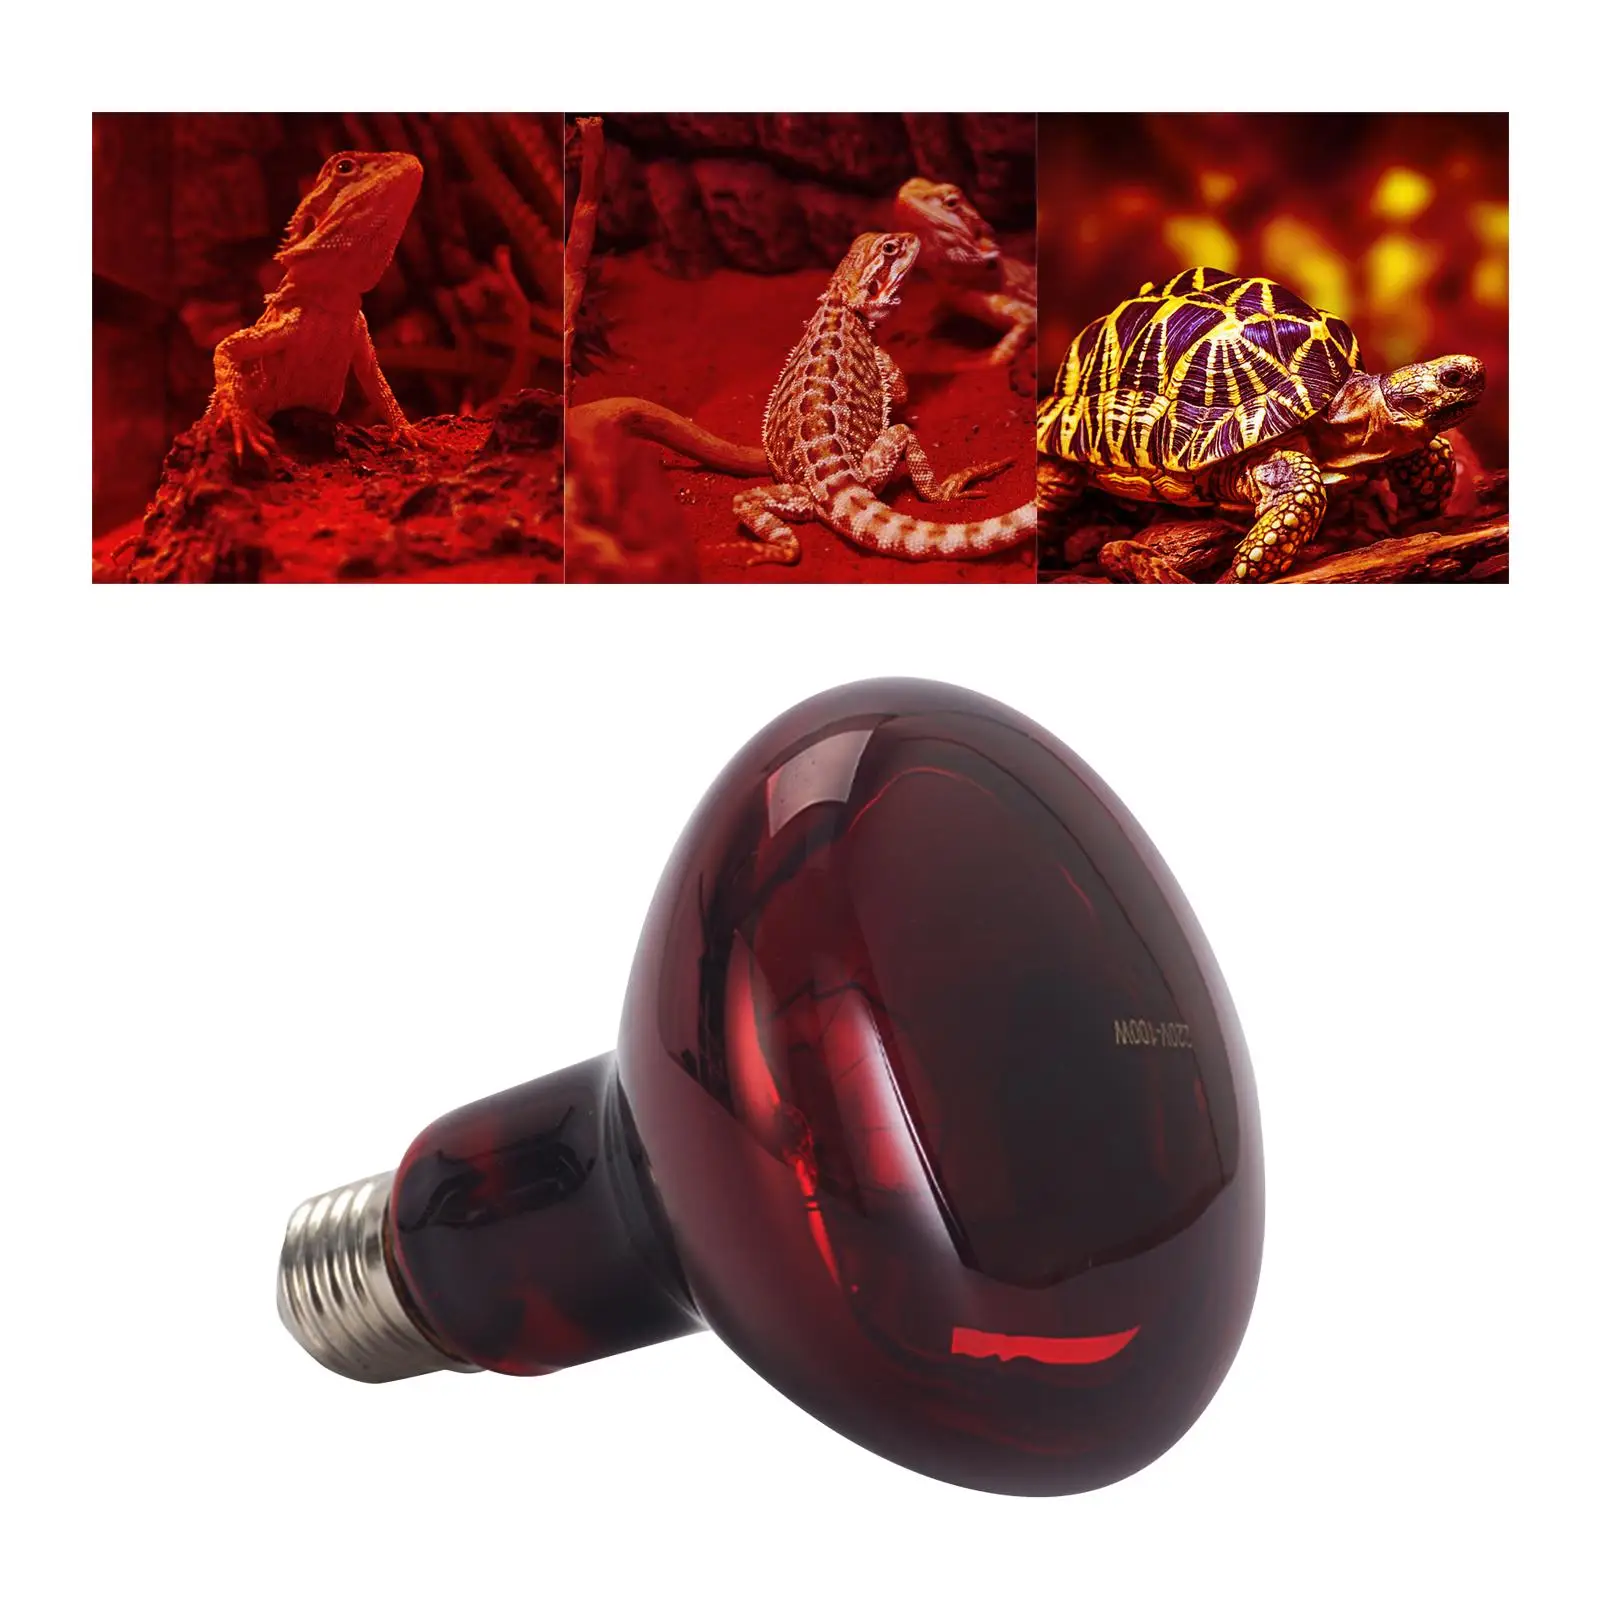 E27 Reptile Light Bulb Heat Lamp Warmer 100W Accessories Daylight Red for Bearded Dragon Hedgehogs Amphibians Home